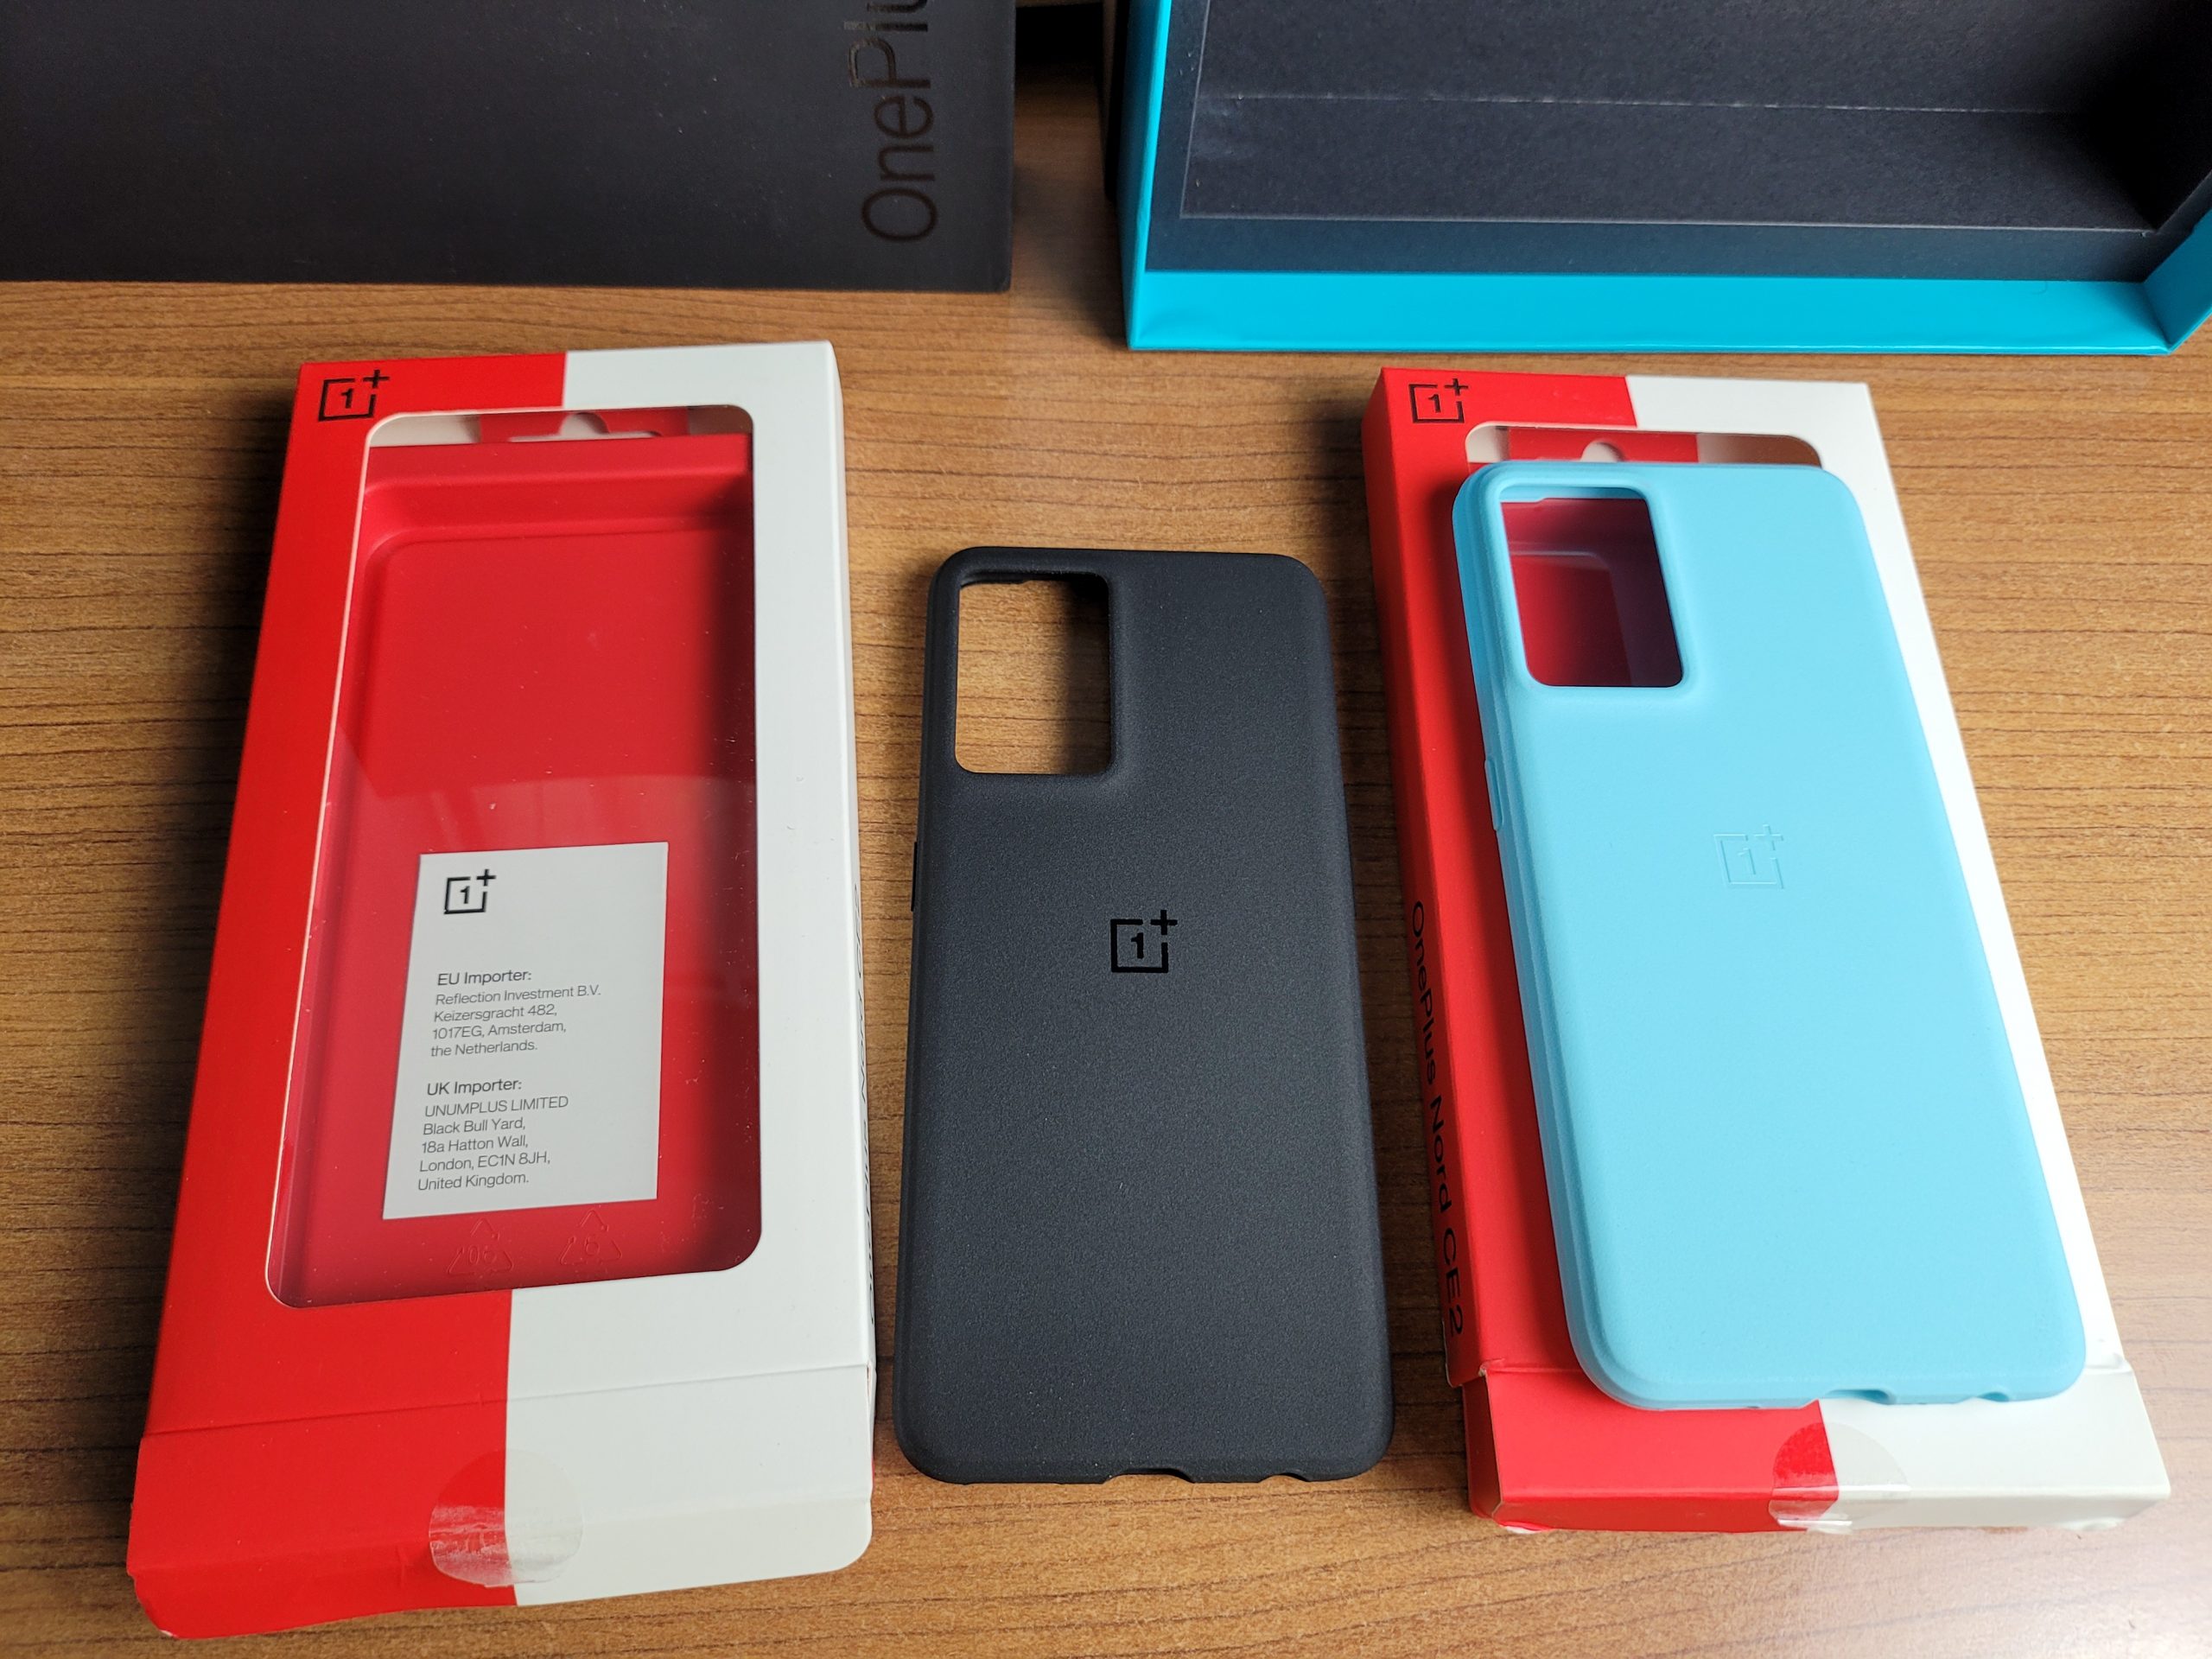 20220513 224703 scaled - OnePlus Nord CE 2 5G recensione